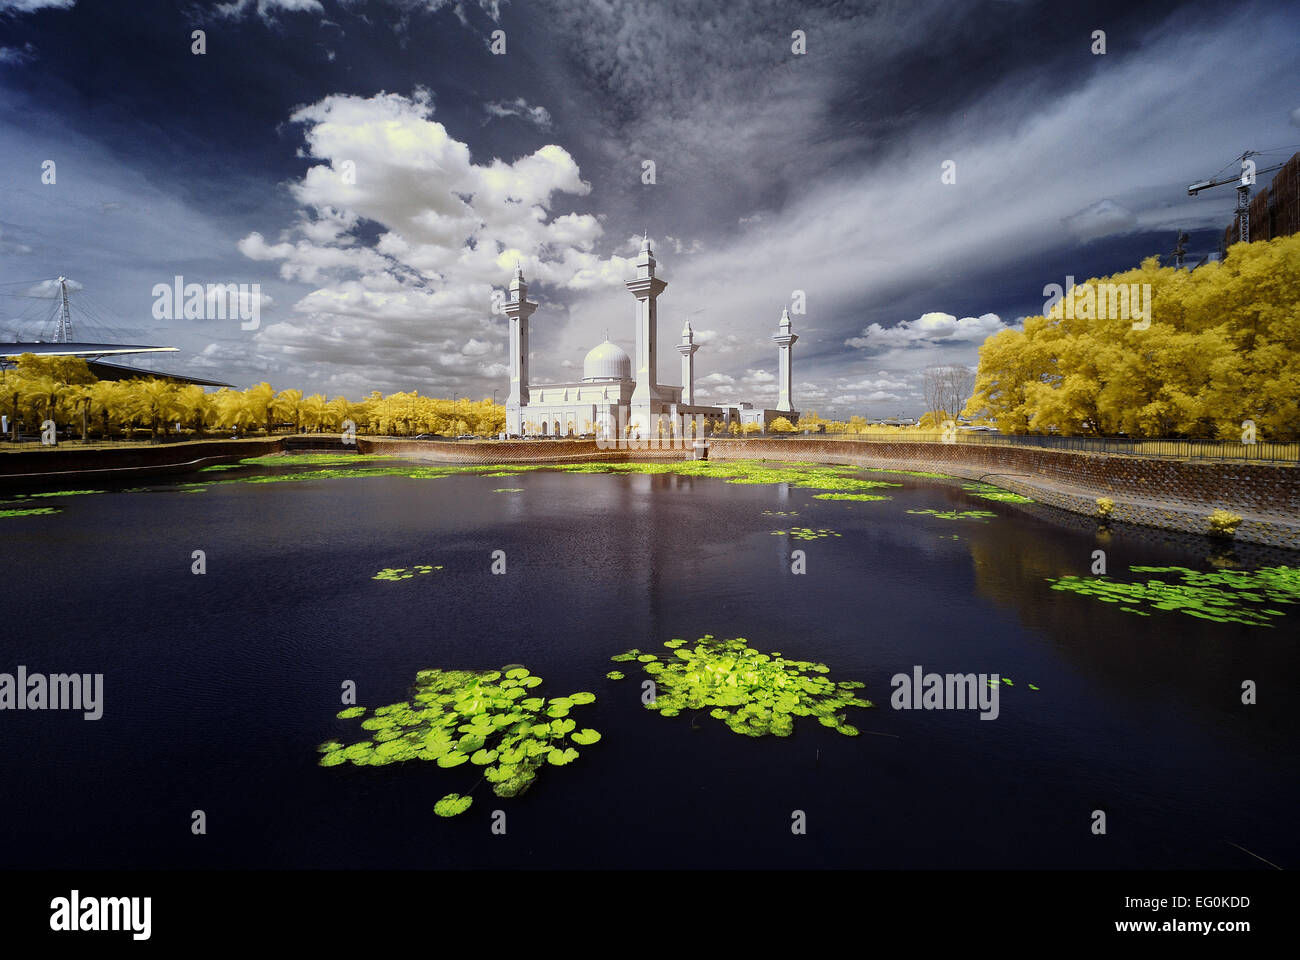 Malaysia, Selangor, Infrared view of Shah alam mosque Stock Photo